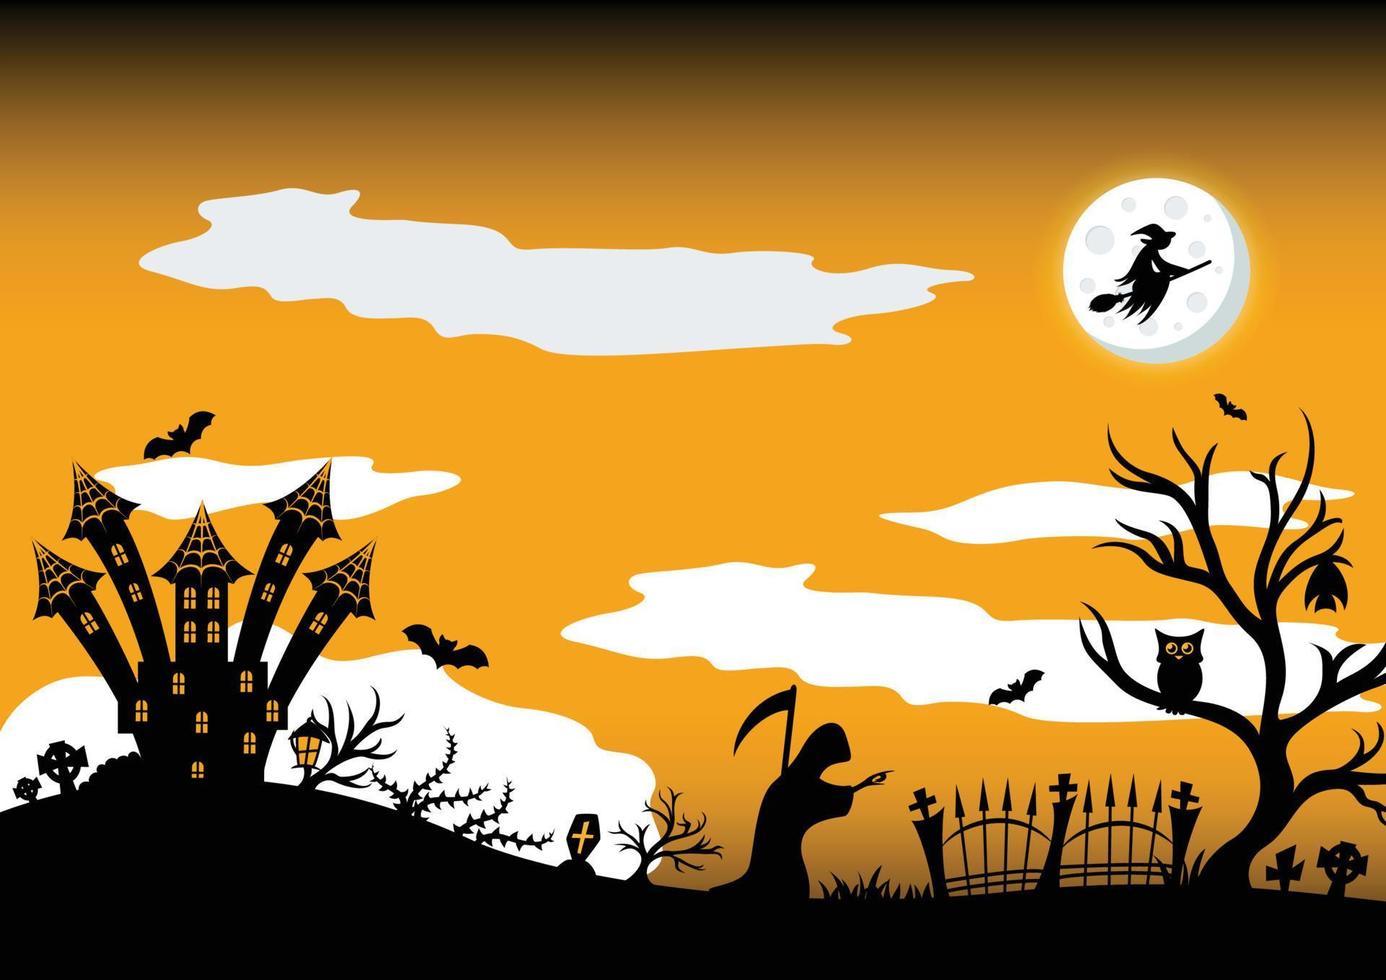 Halloween Background with Silhouette Scary Castle, Full Moon, Cemetery and Grim Reaper vector